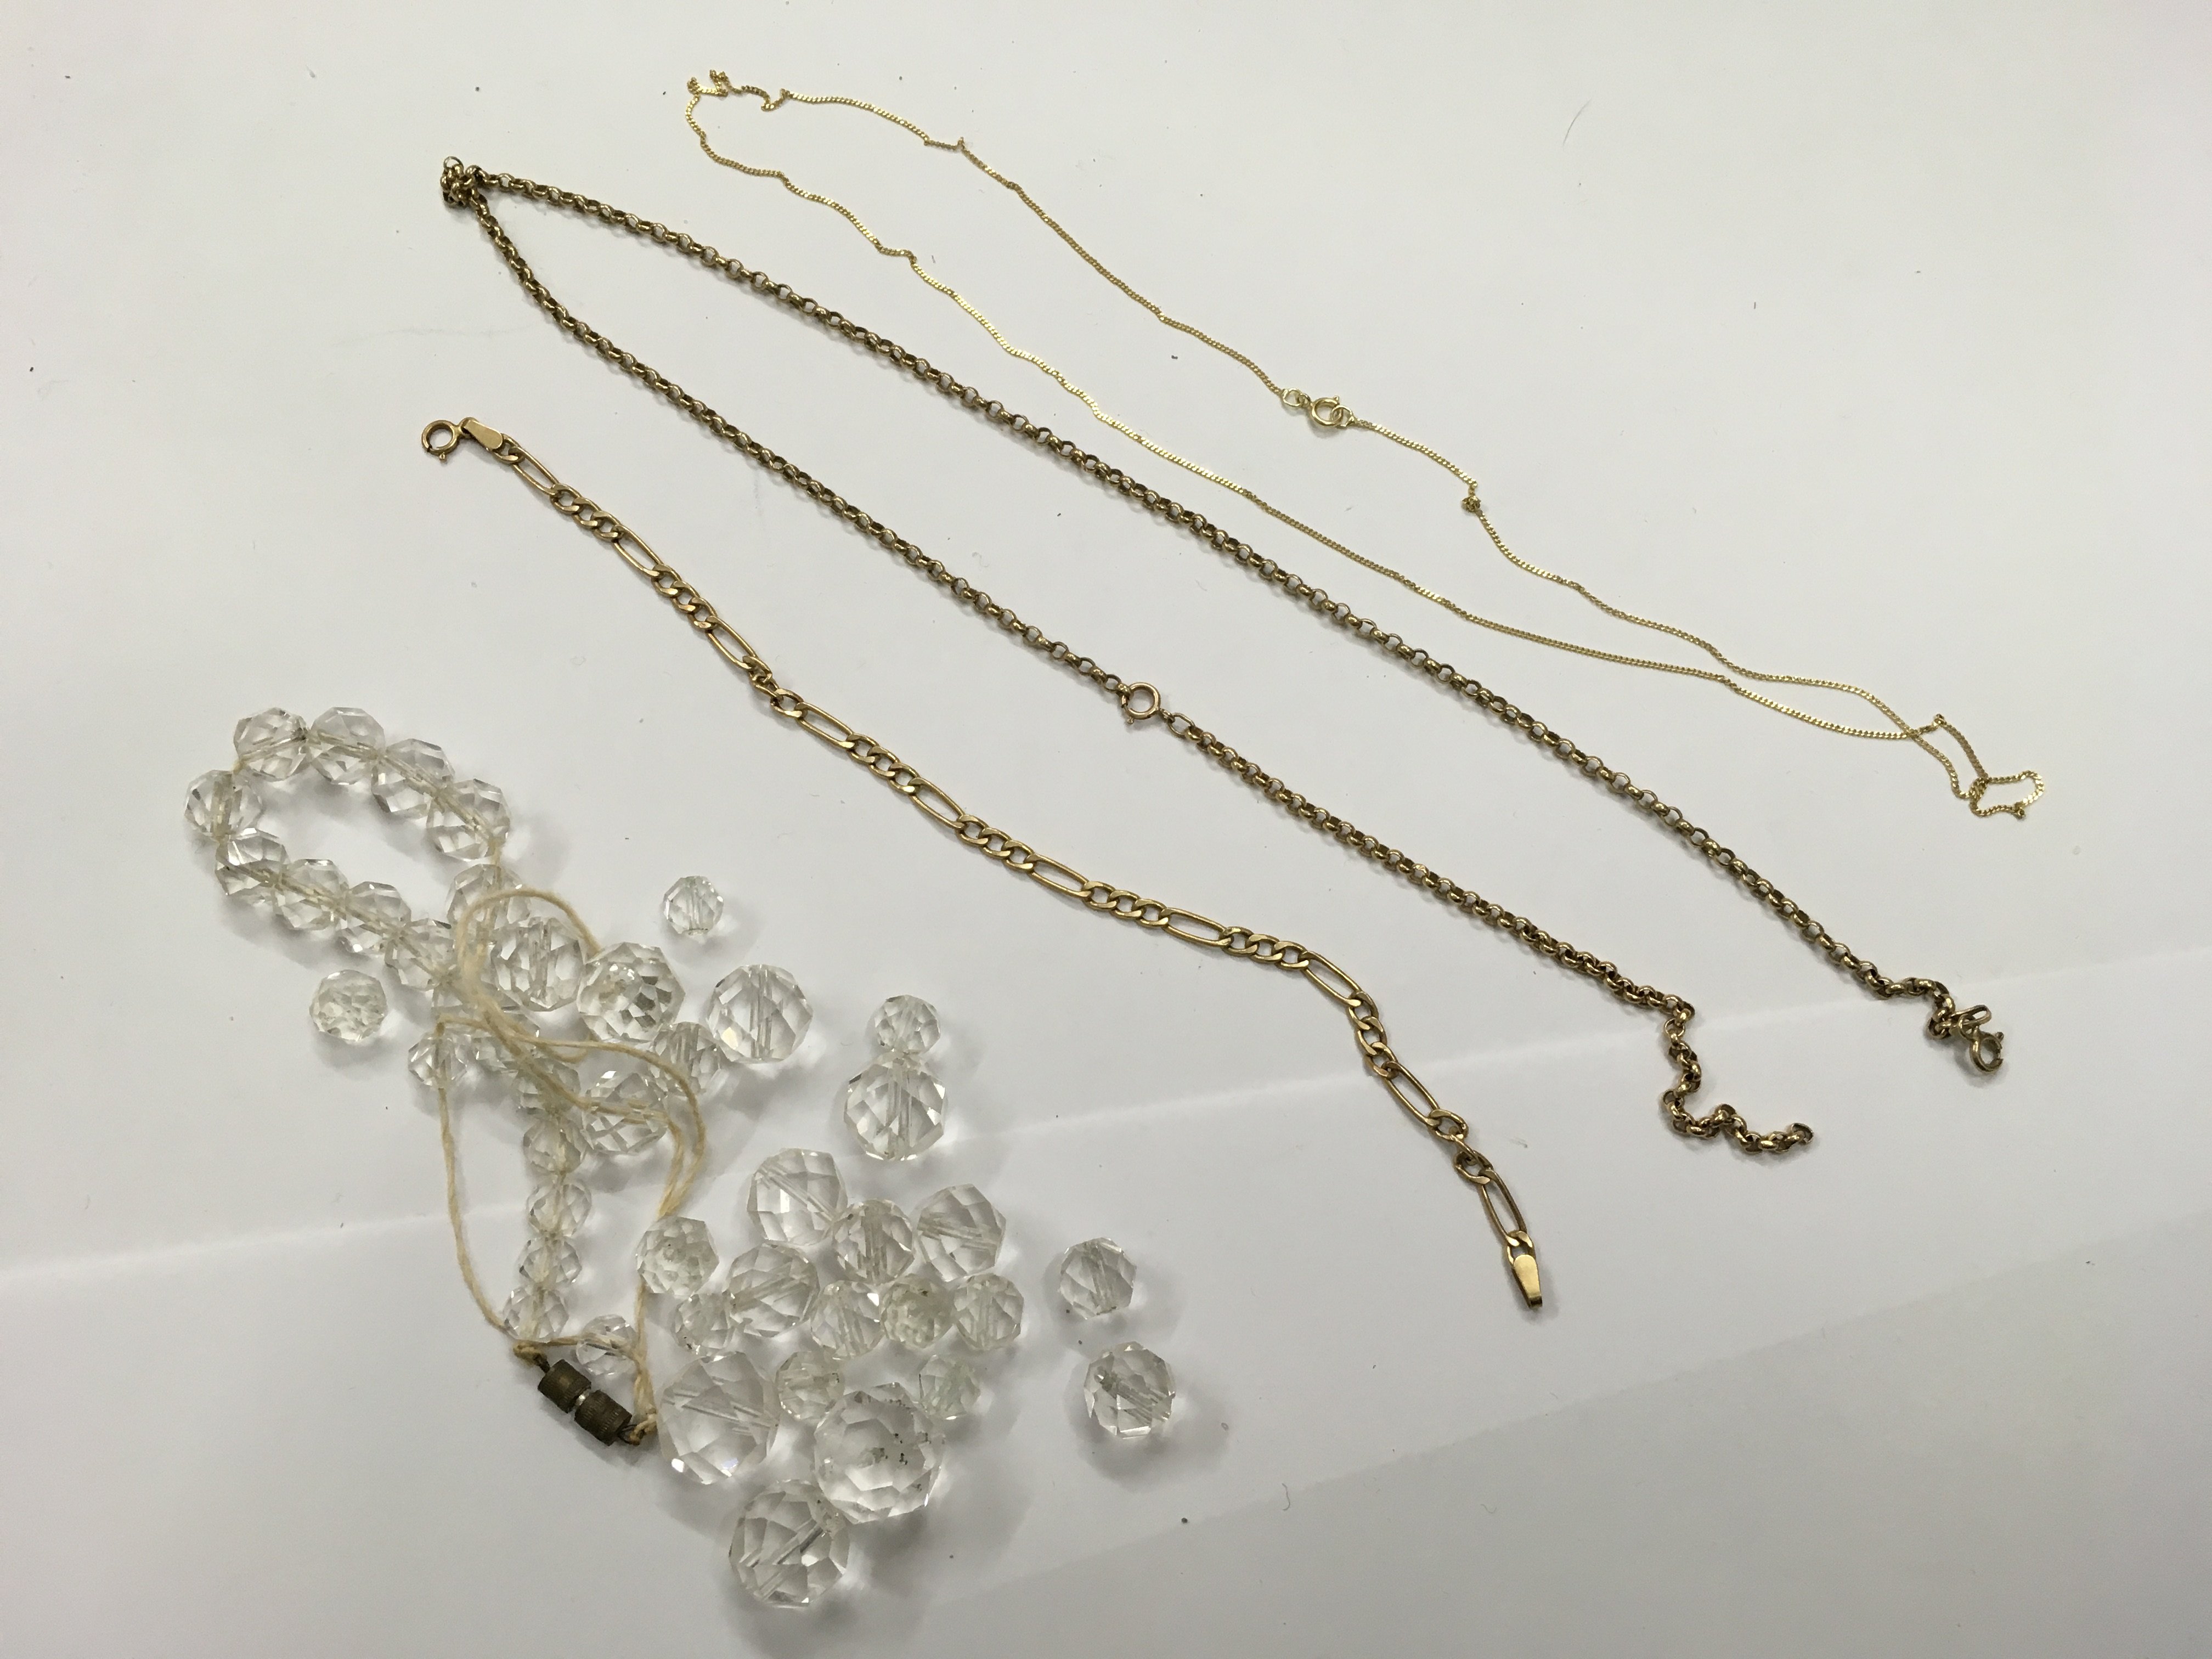 2 gold necklaces, a gold bracelet and a cut glass bead necklace in need of restringing.